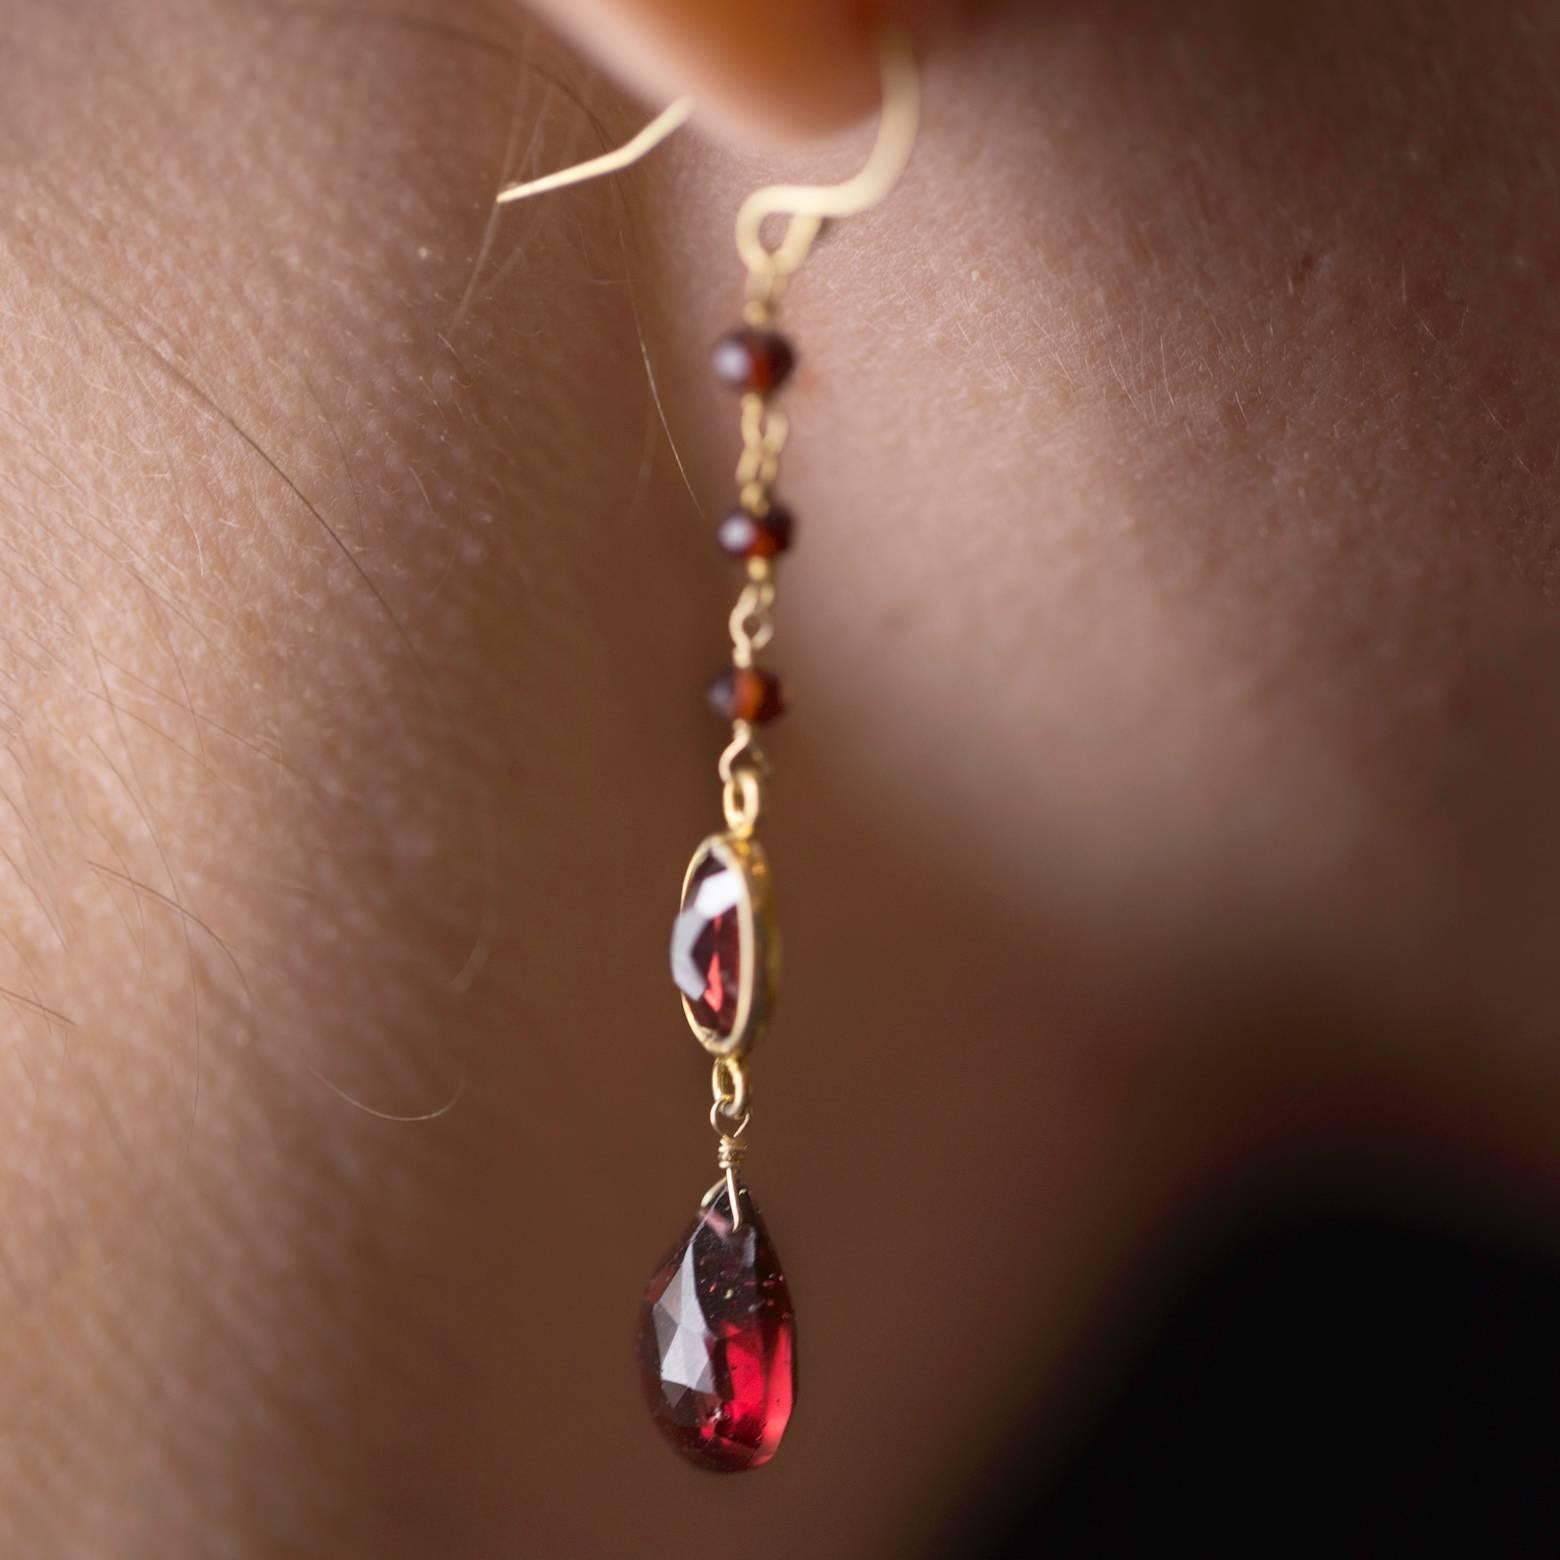 Women's Faceted Garnet and Gold Dangling Earrings in a Tapered Design